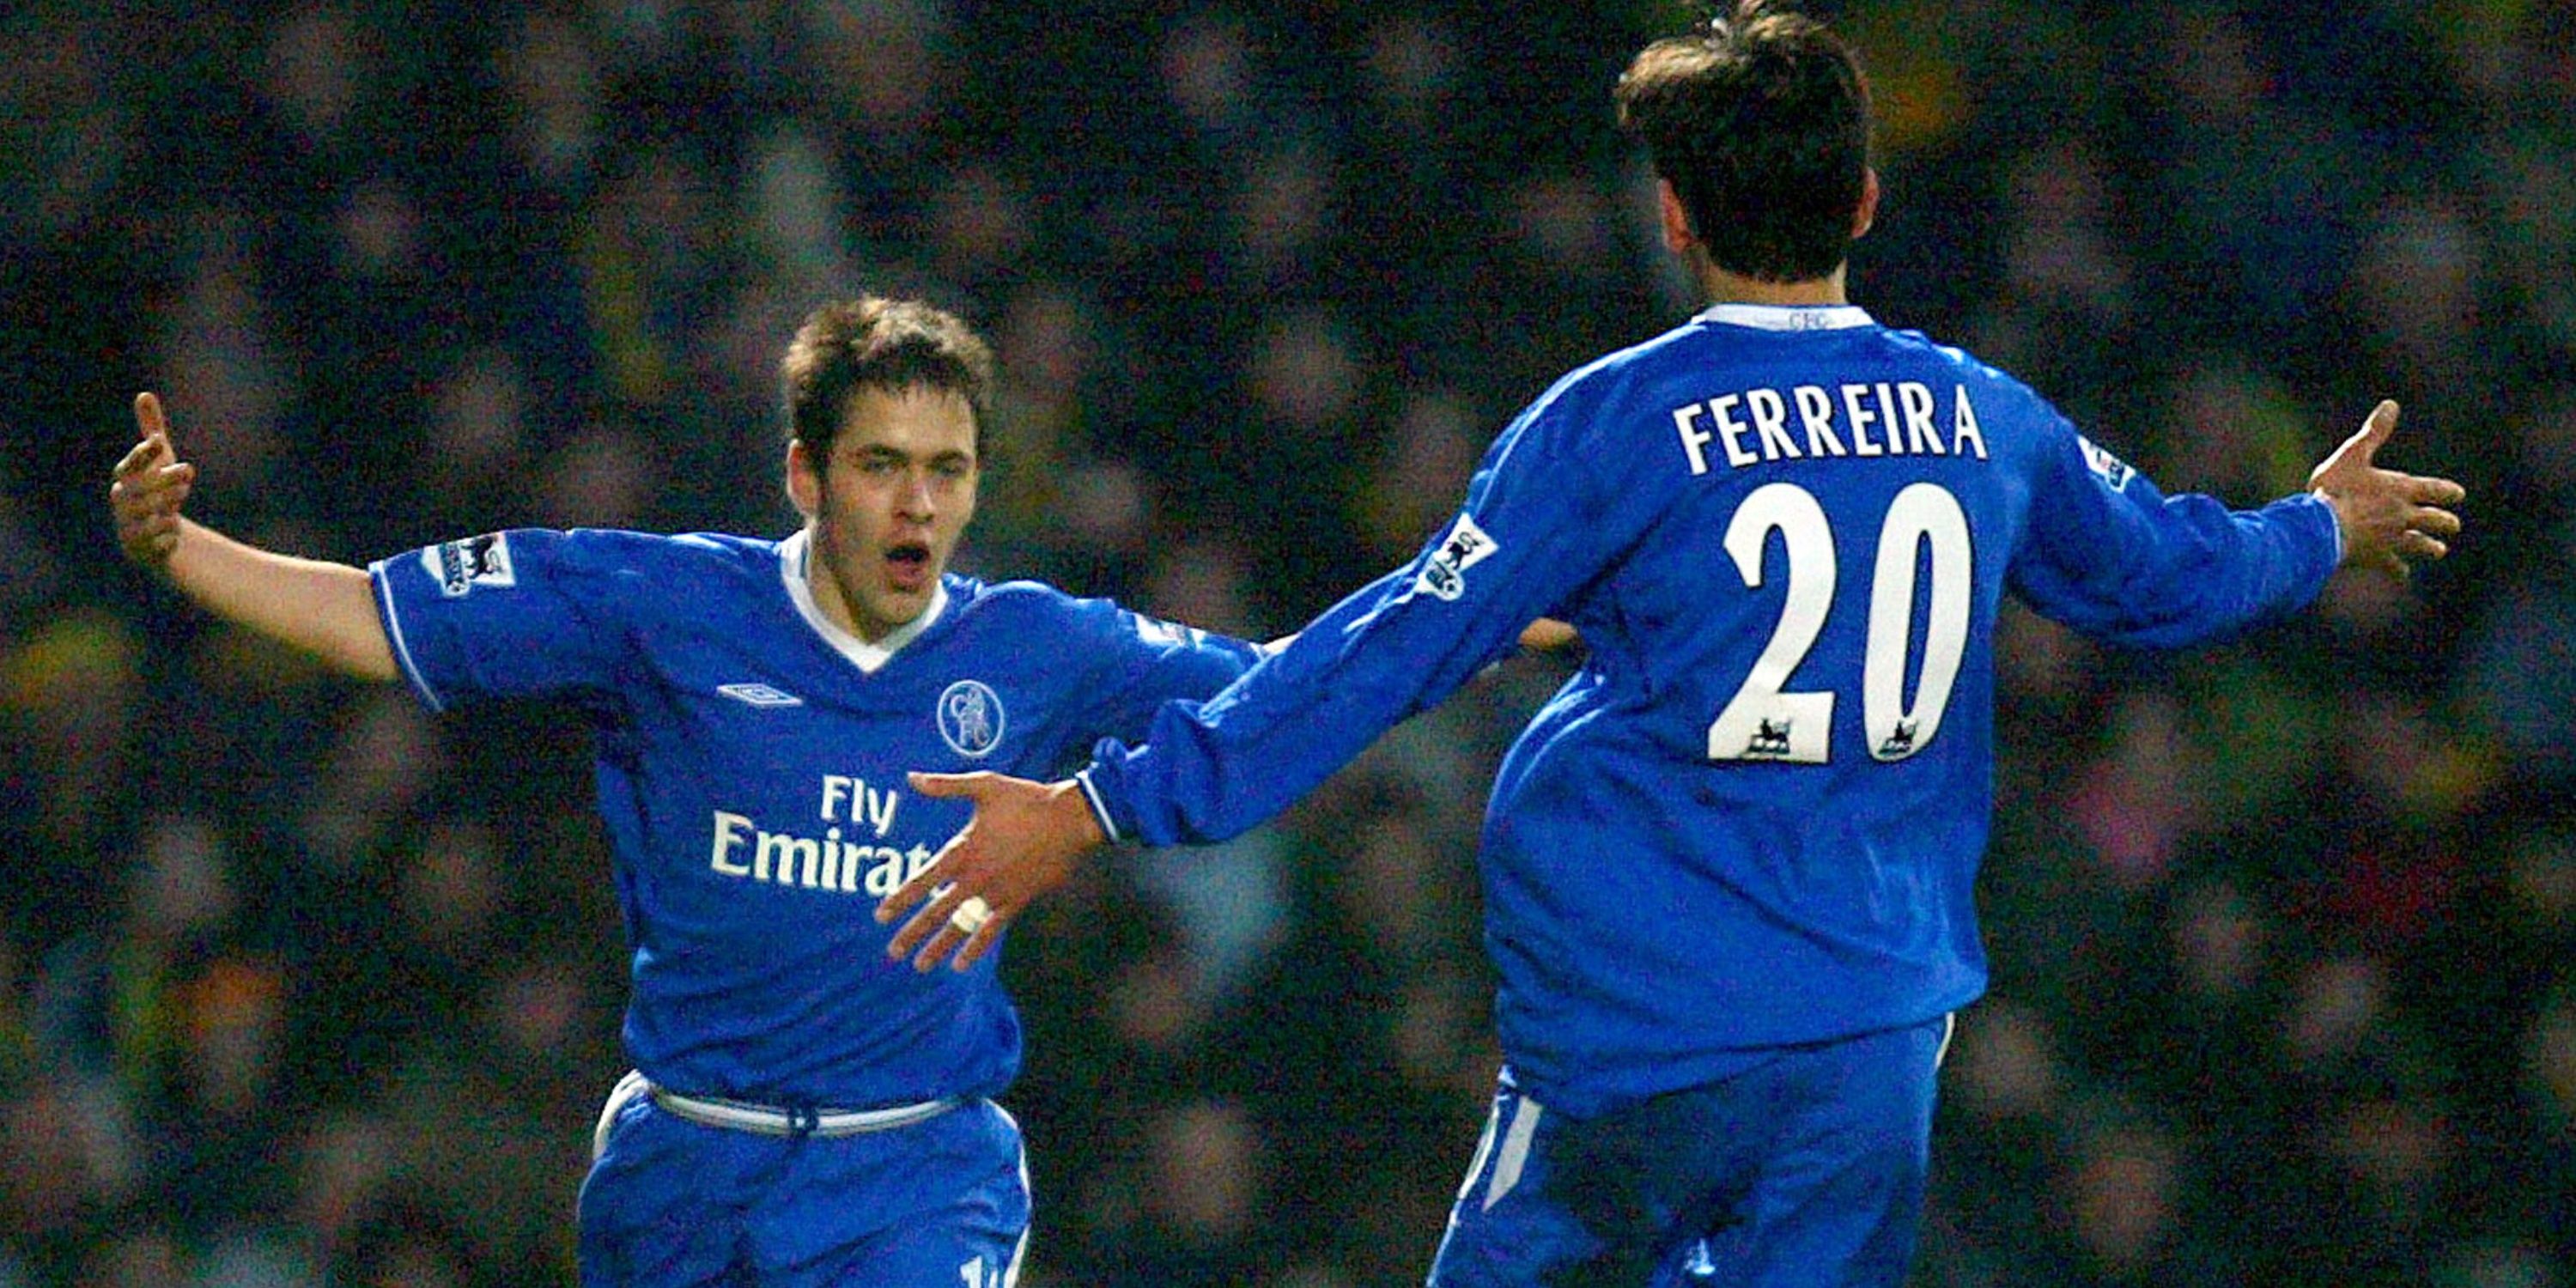 Paulo Ferreira and Joe Cole in action for Chelsea